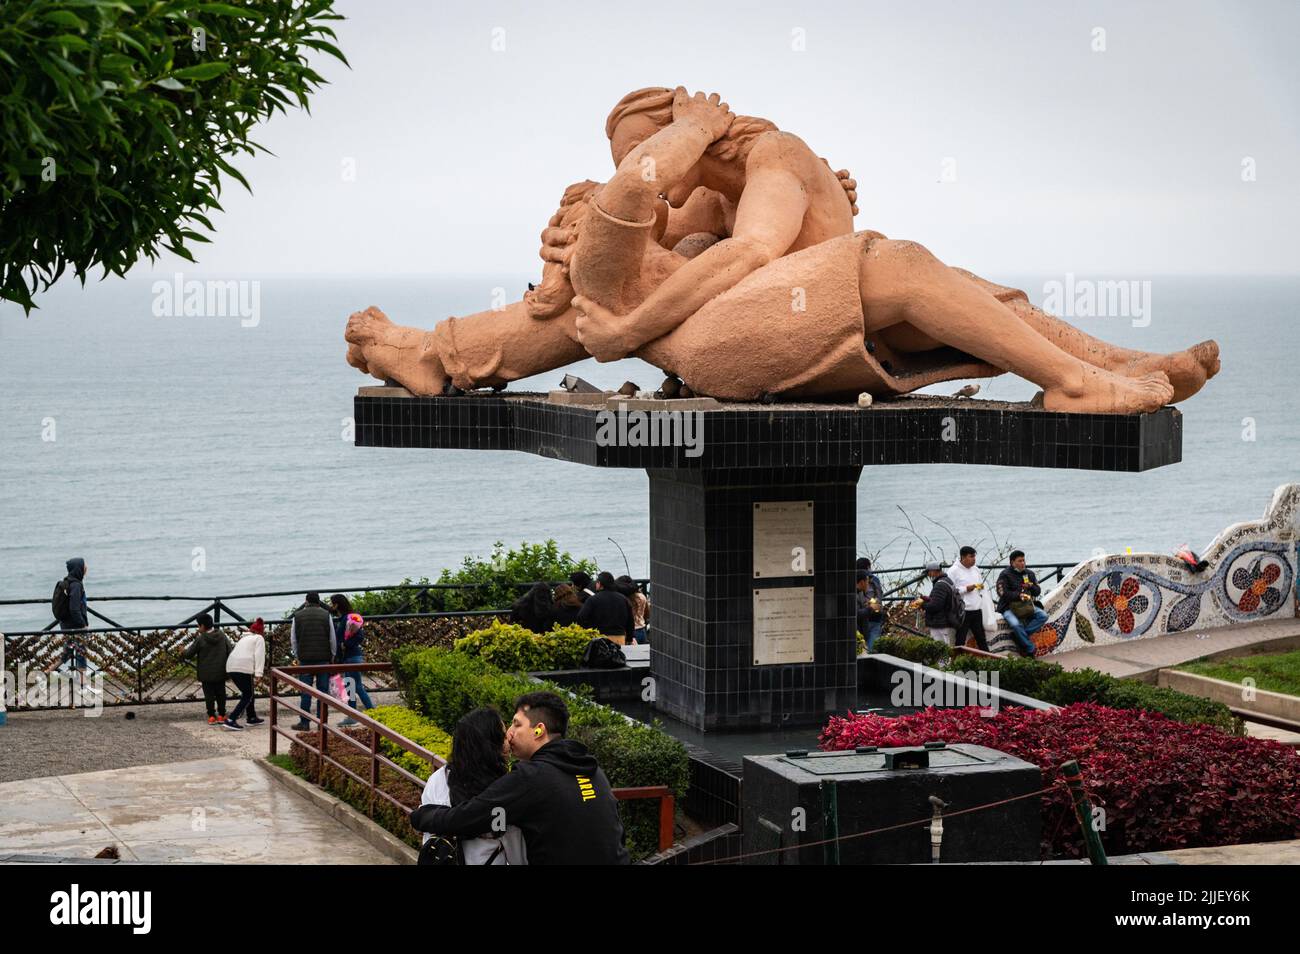 A young couple kisses in front of a public art sculpture entitled 'El Beso' (the kiss) at the Miraflores malecon on a Sunday afternoon. Stock Photo